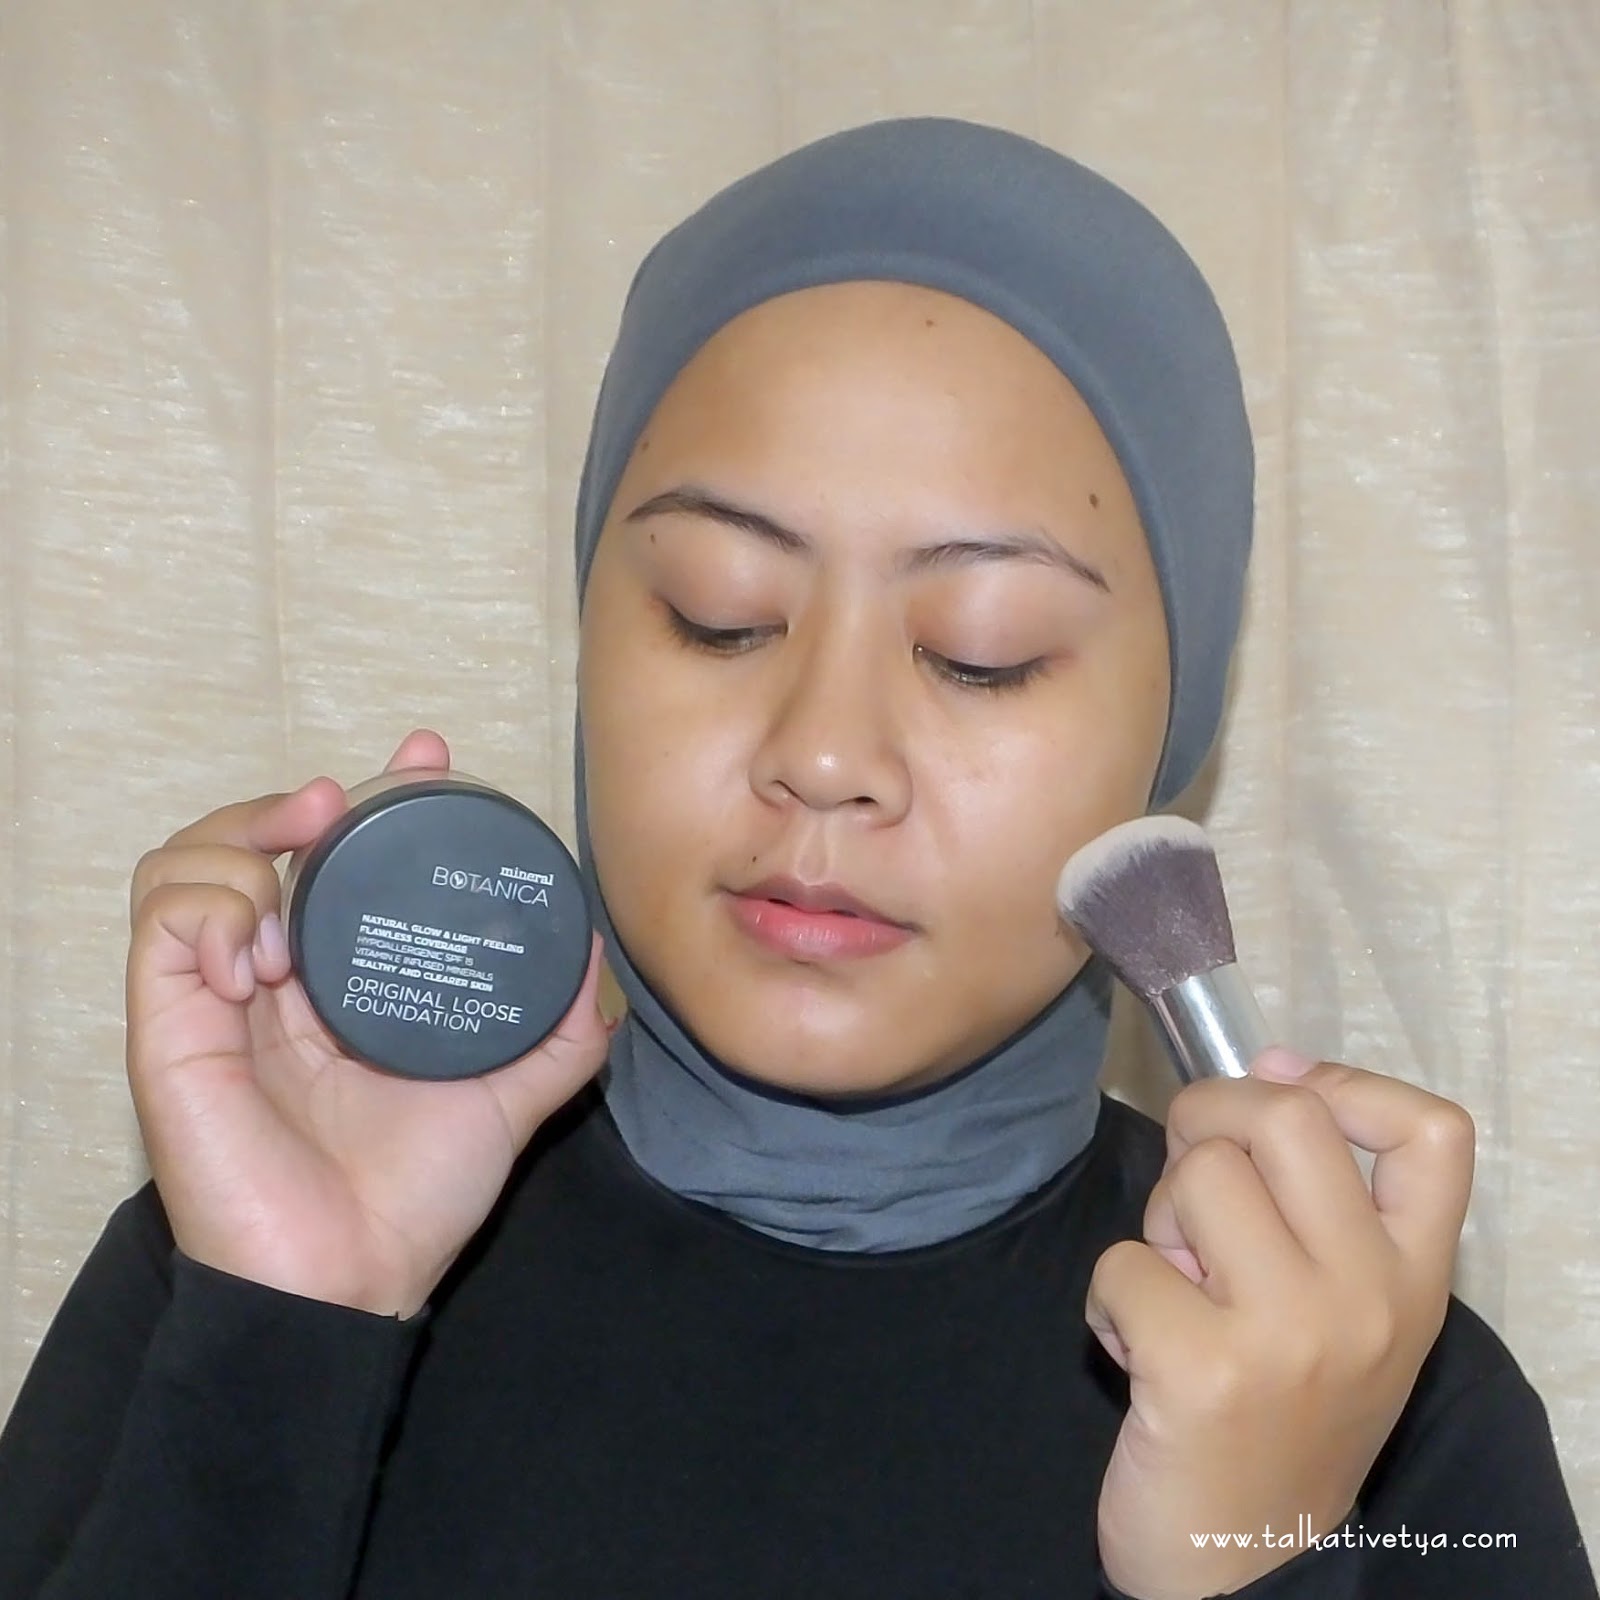 TUTORIAL QUICK AND EASY EVERYDAY MAKEUP Talkative Tya